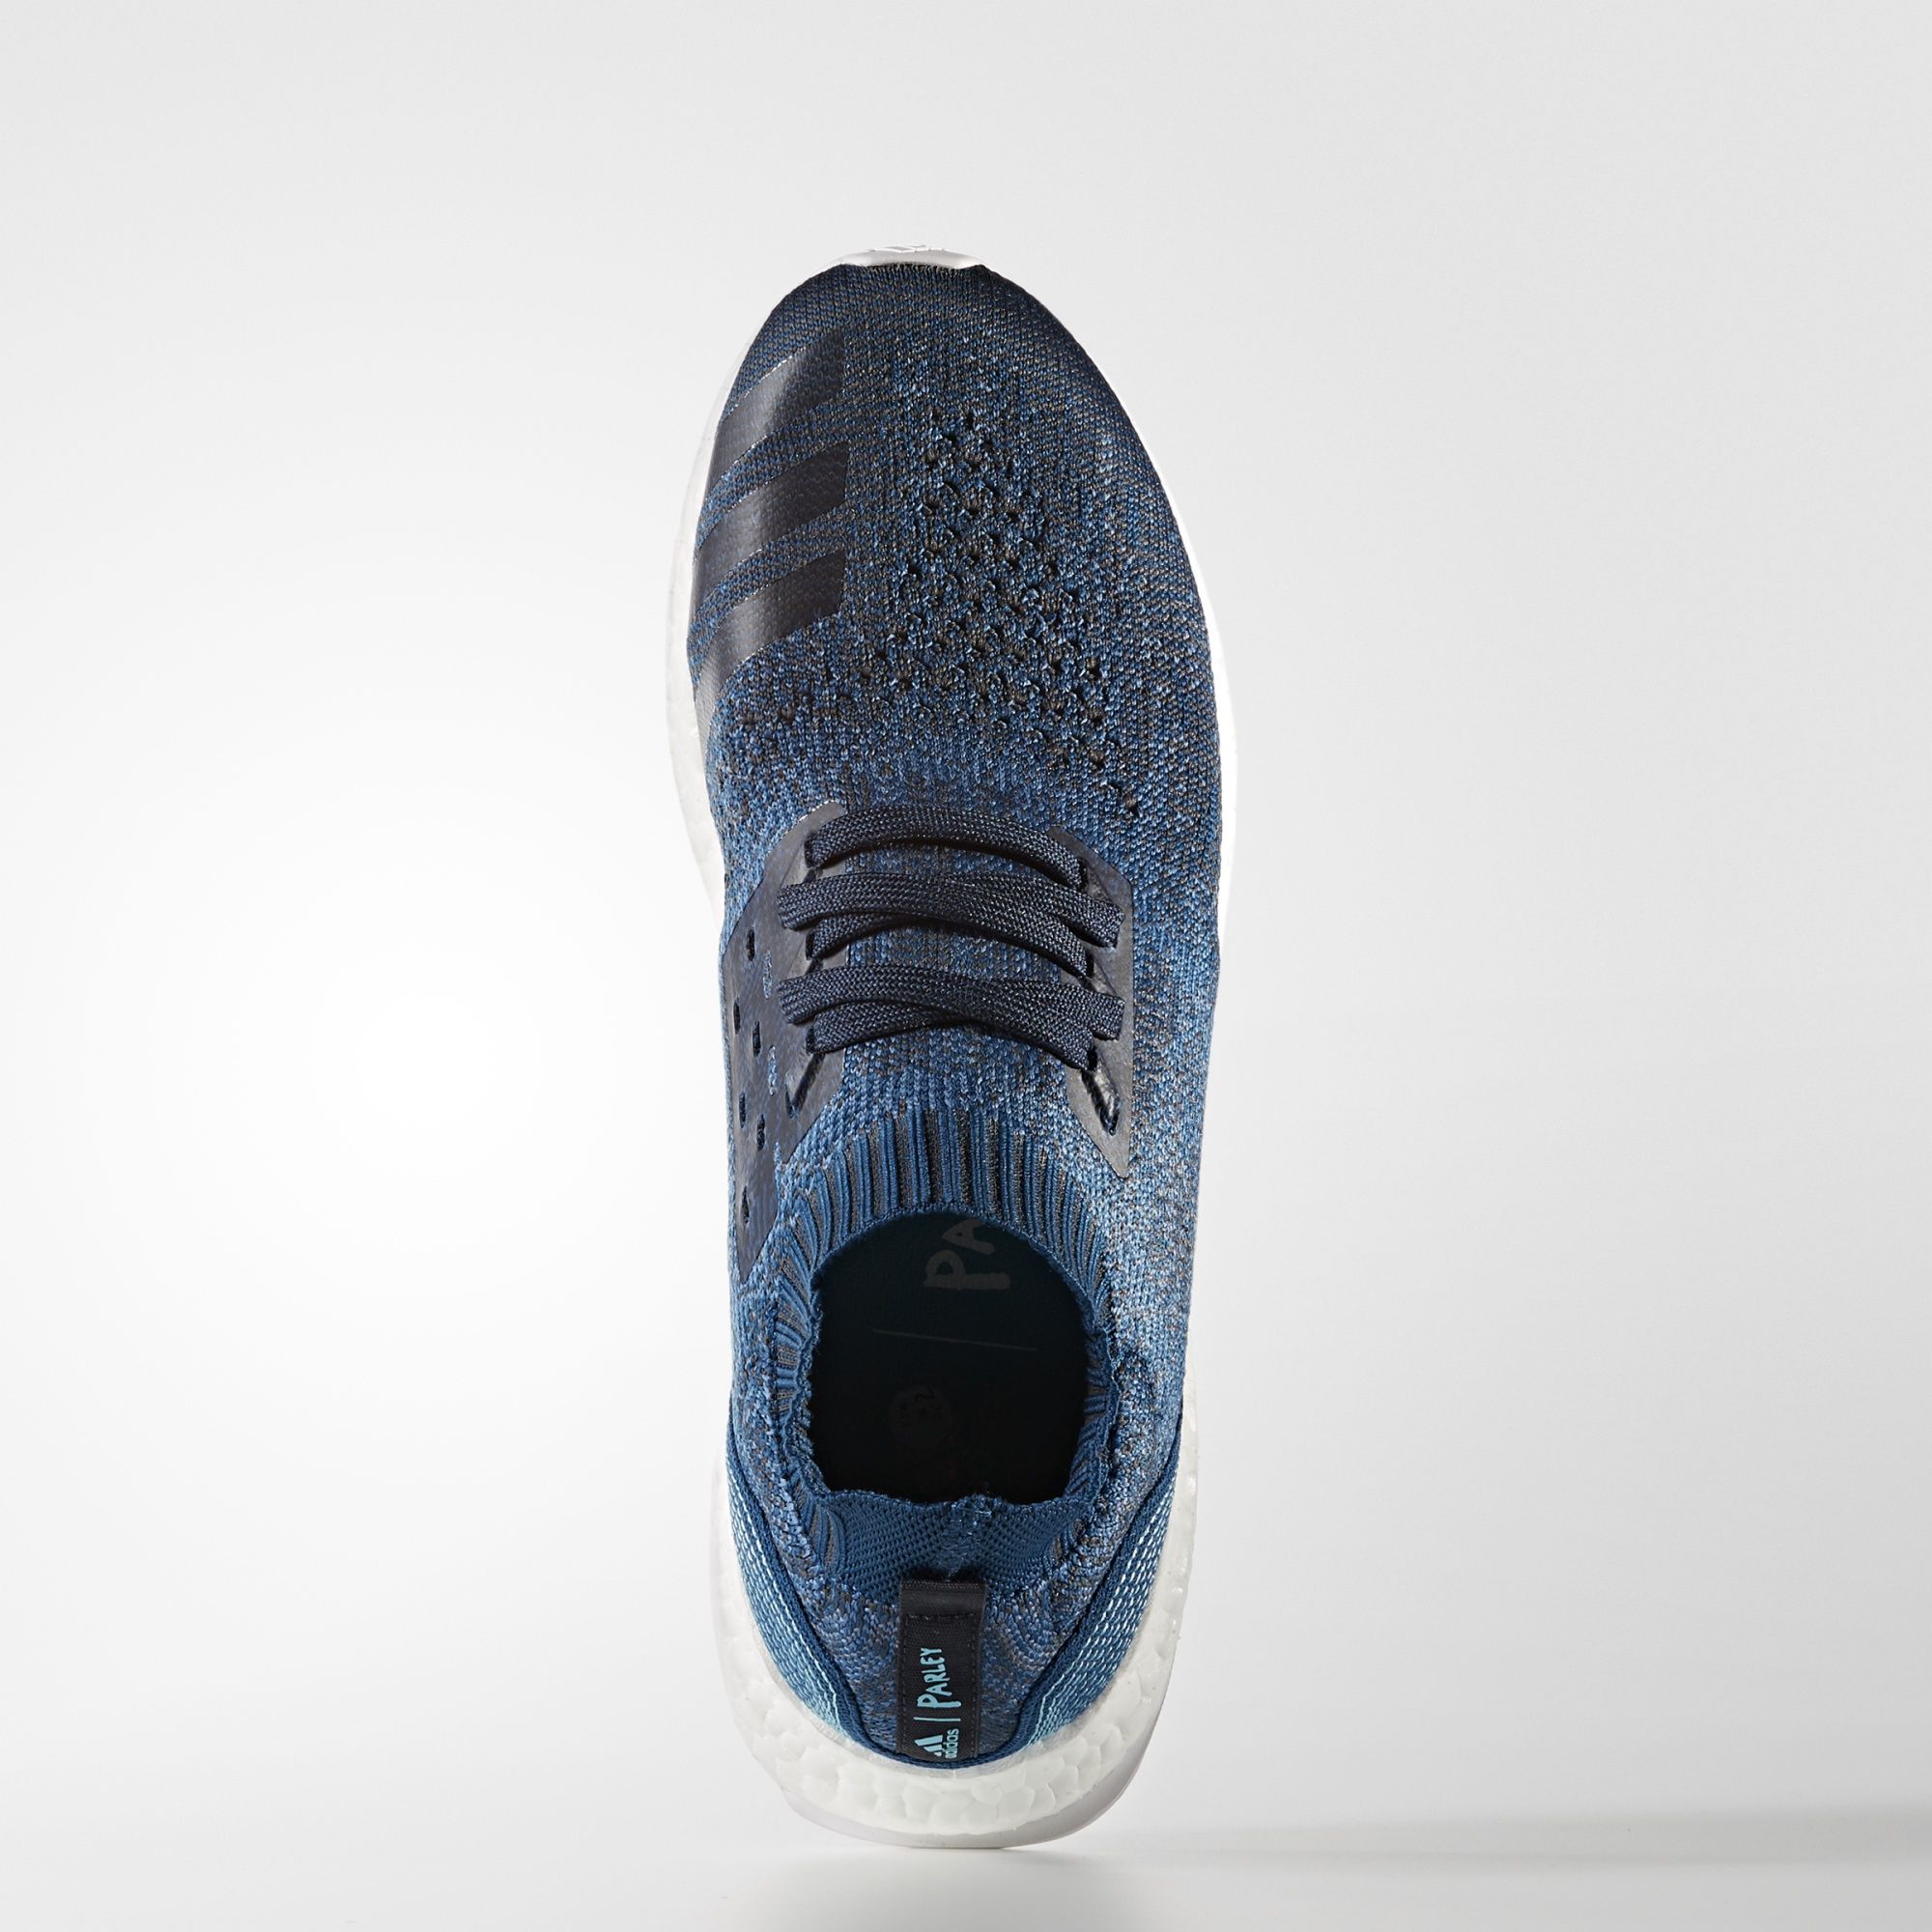 Adidas Ultra Boost Uncaged Parley
Blue / White